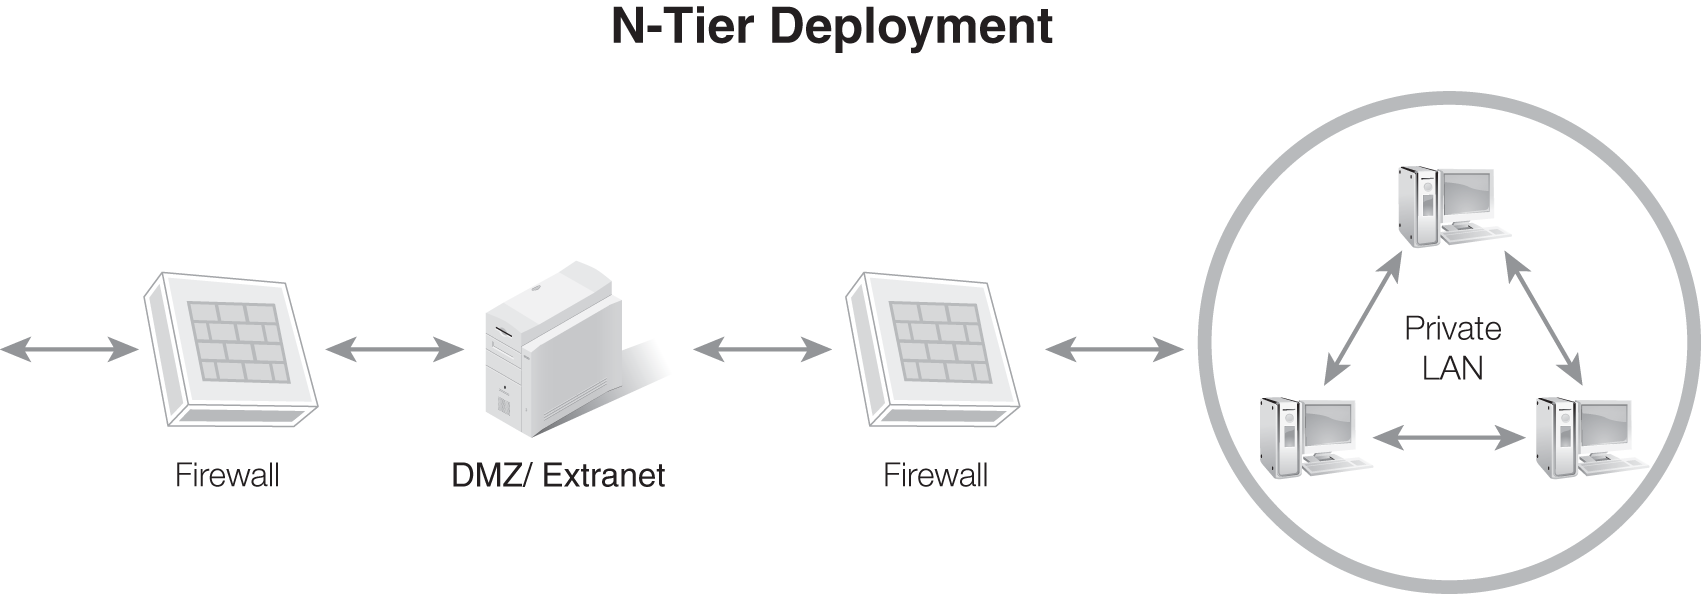 A diagram illustrates a DMZ or extranet deployed in an N-tier configuration with an N-Tier Deployment.